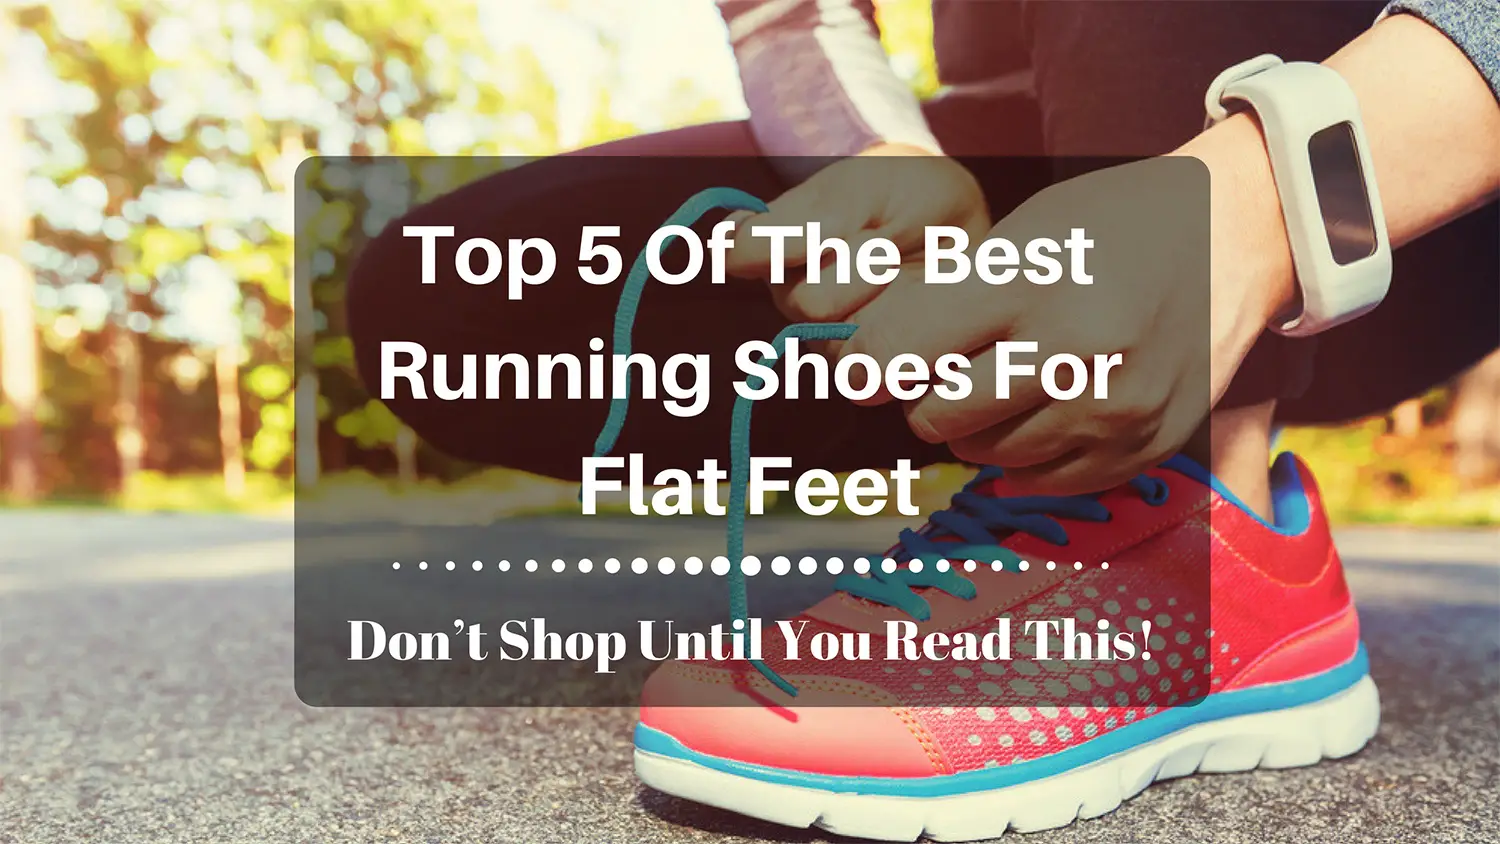 Do you have flat feet, but want to continue training? No worries, we have the list of the best running shoes for flat feet.